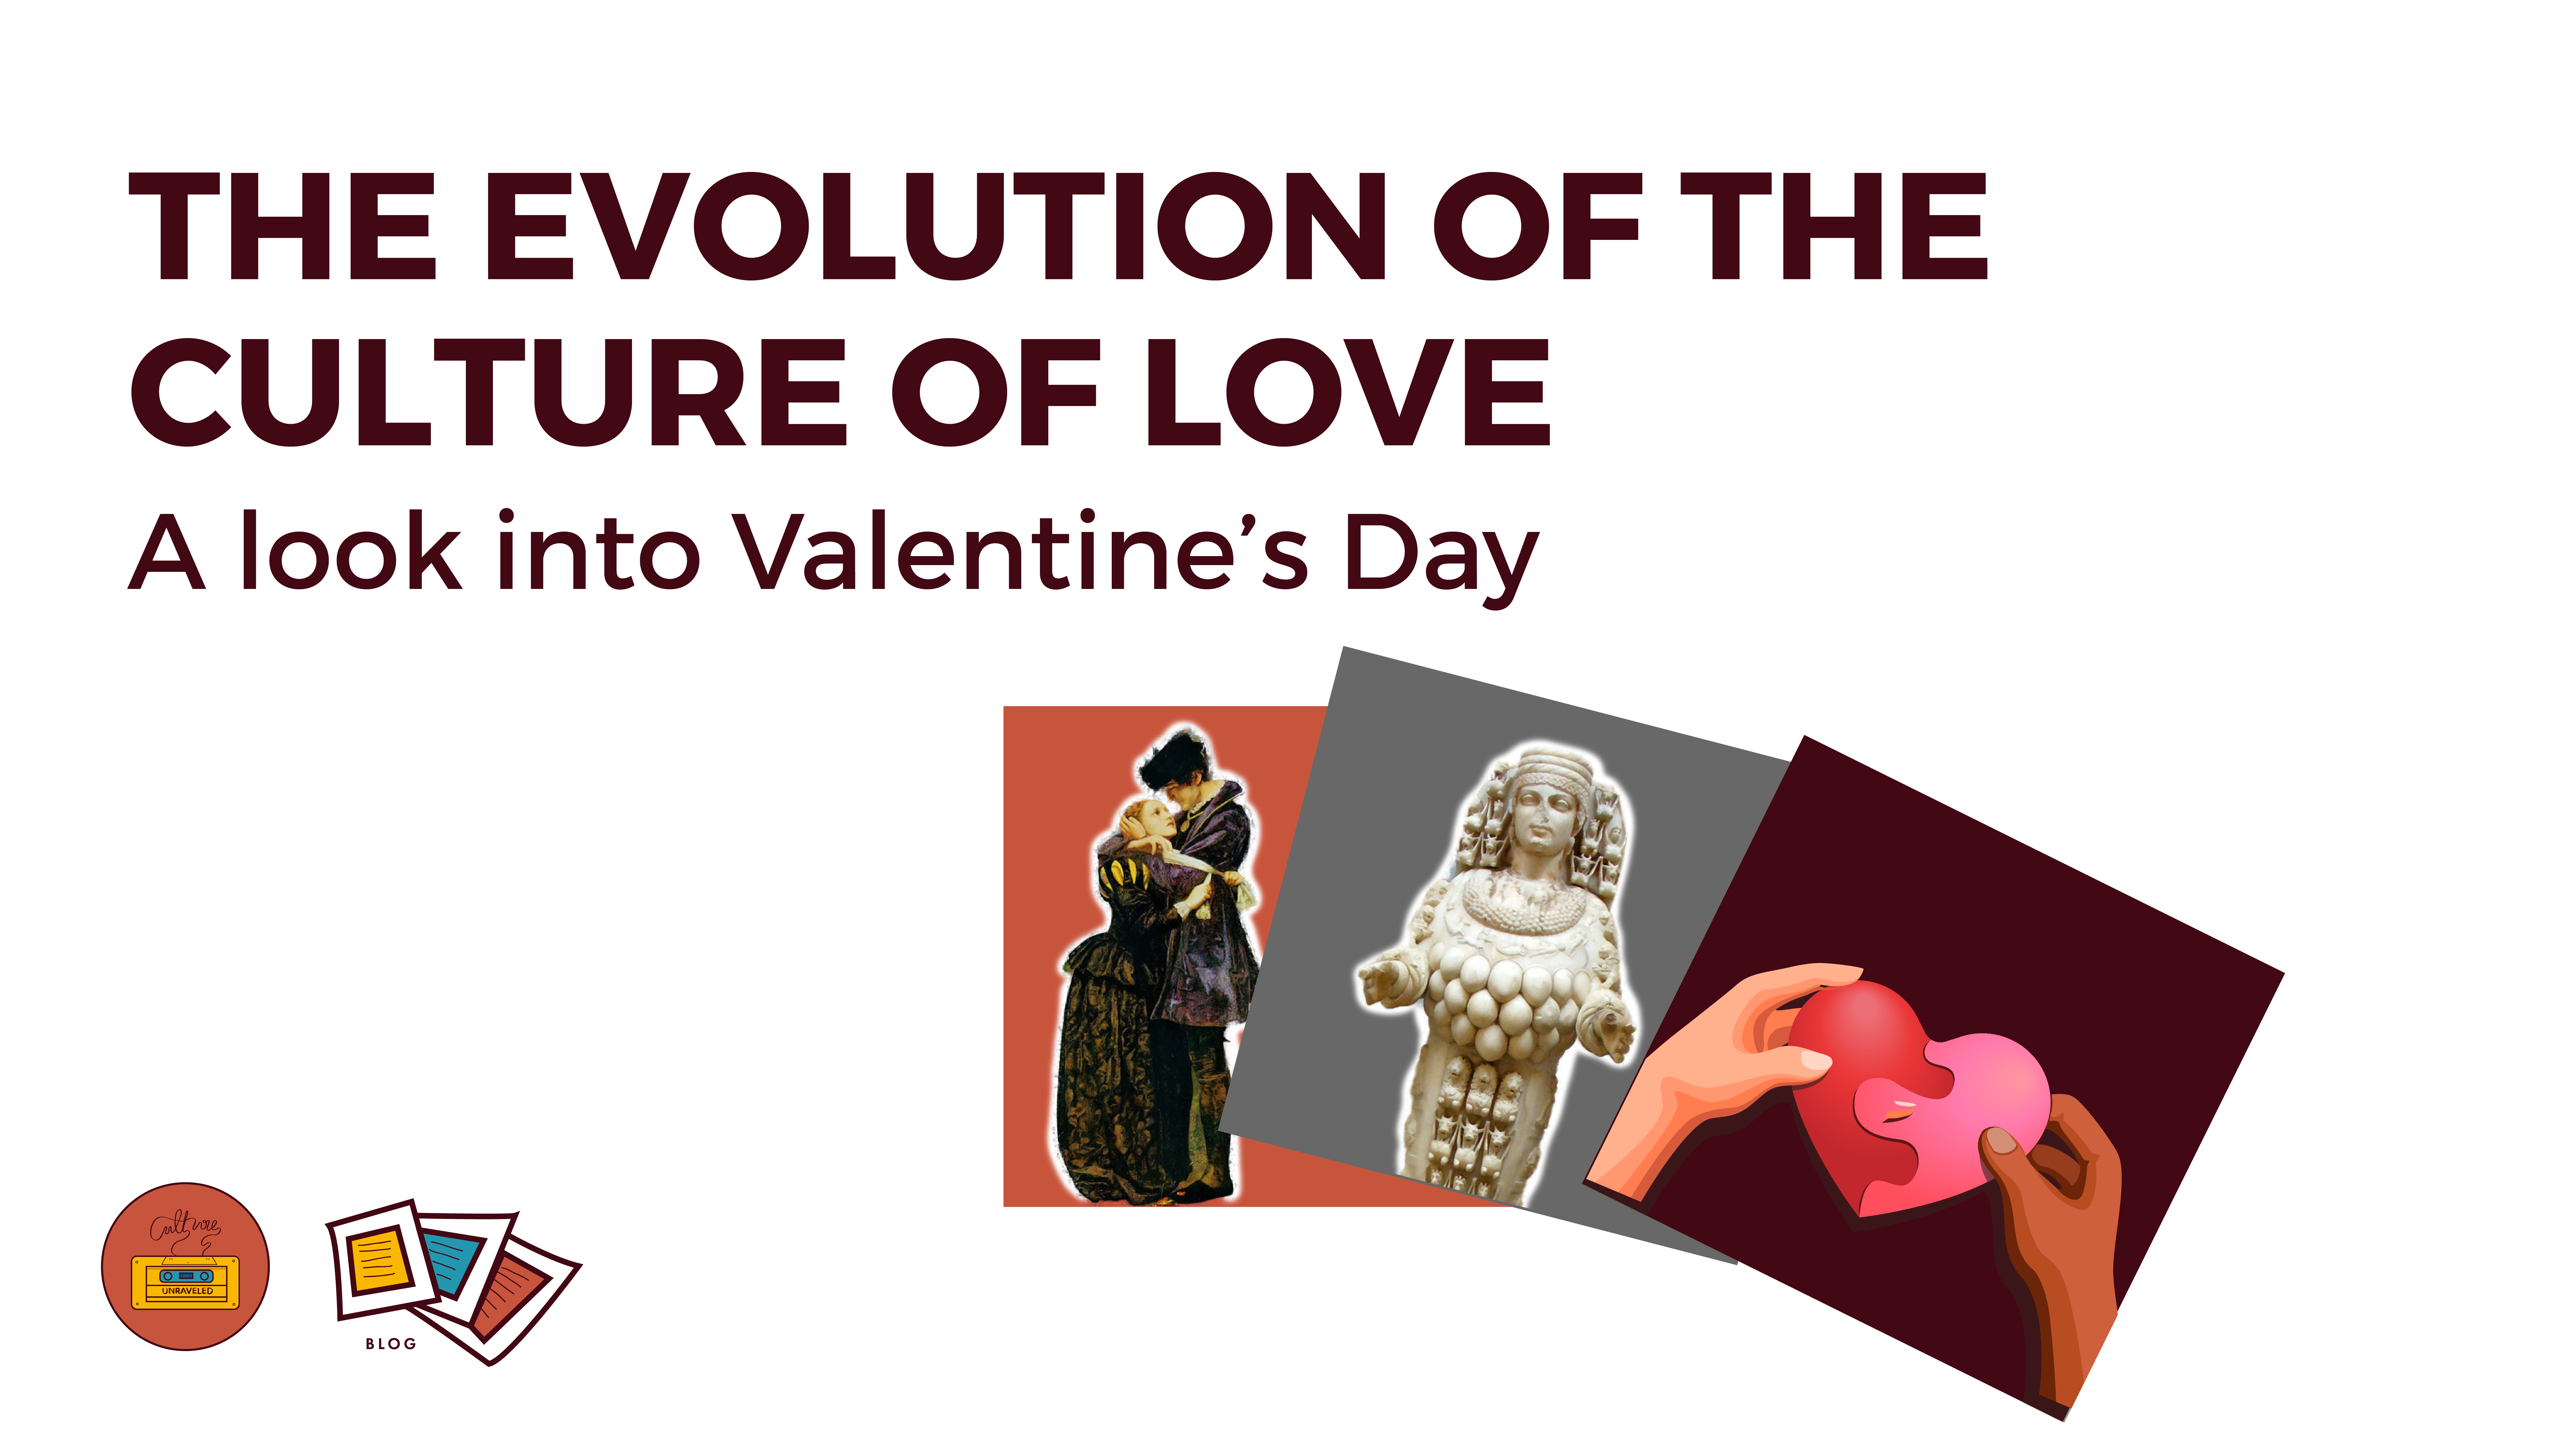 Valentin’s Day – A Look Into The Evolution of The Culture Of Love